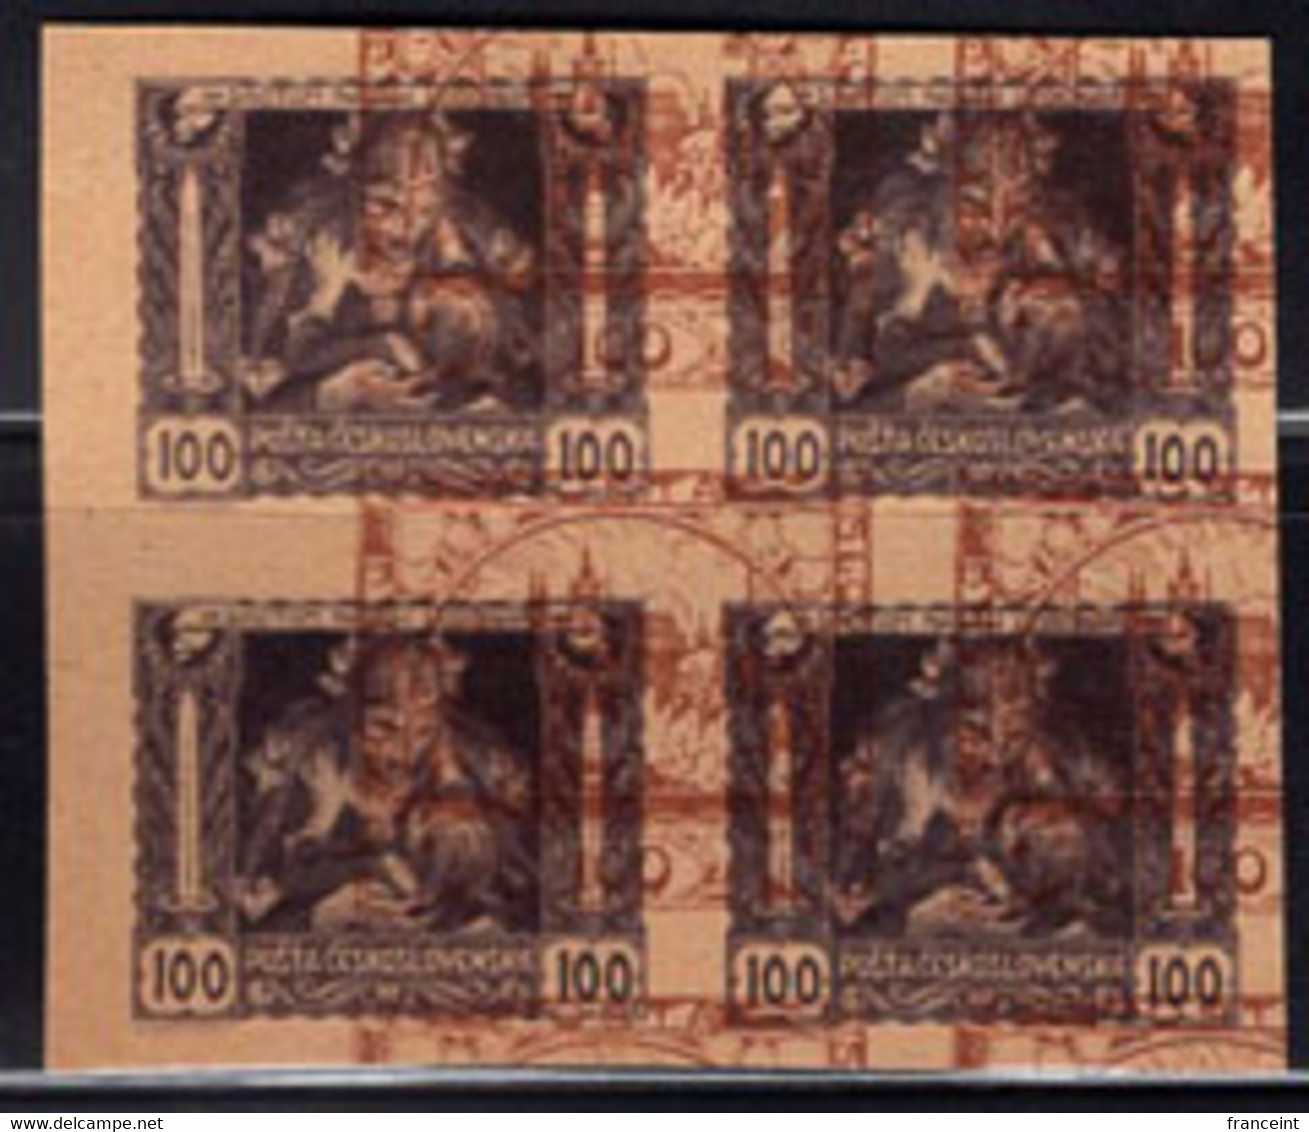 CZECHOSLOVAKIA(1919) Mother And Child. Block Of 4 Imperforate Proofs On Yellow Paper With Overlay Of Hradcany - Prove E Ristampe